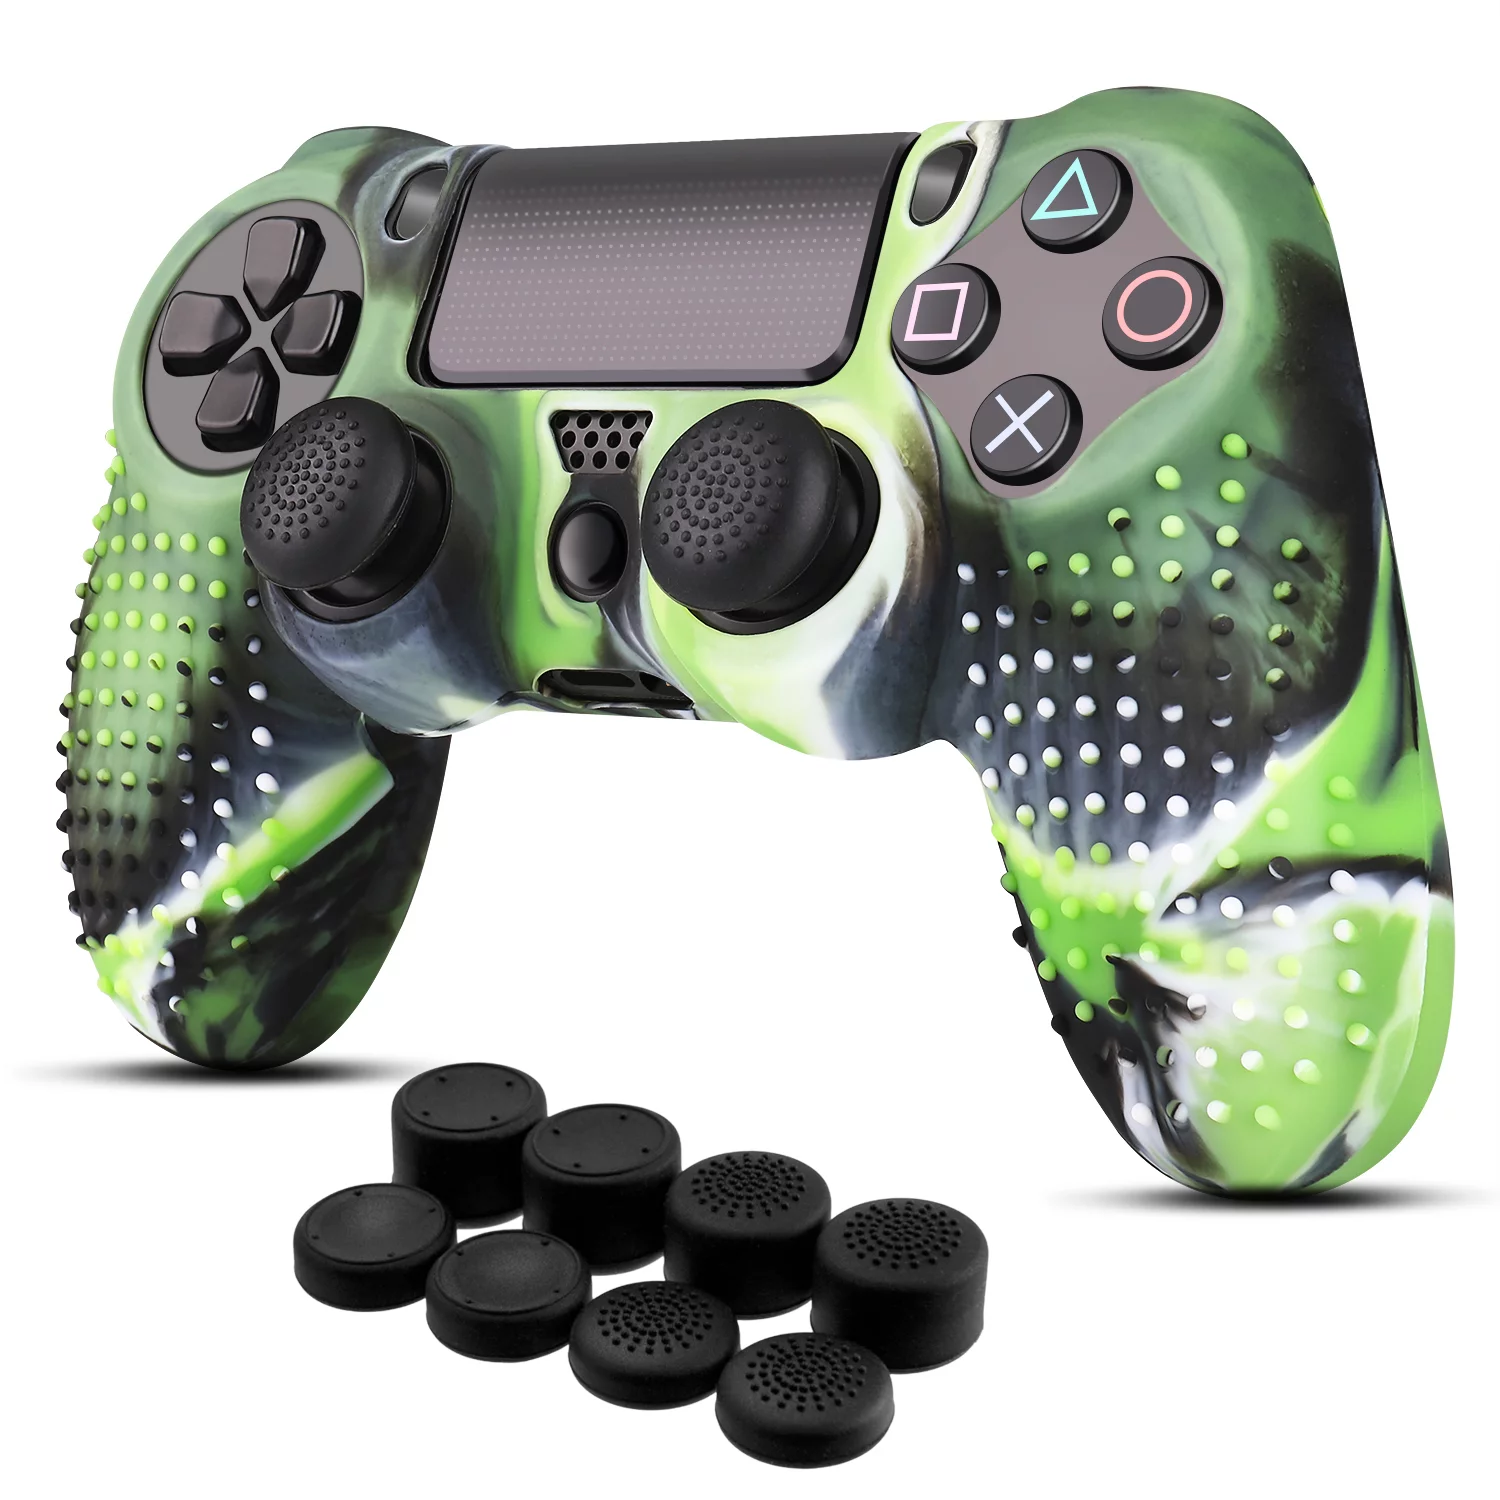 PS4 / Slim / Pro Controller Skin Grip Cover Case Set - Protective Soft Silicone Gel Rubber Shell & Studded Anti-slip Thumb Stick Caps for Sony PlayStation 4 Controller Gaming Gamepad (Camou Green)